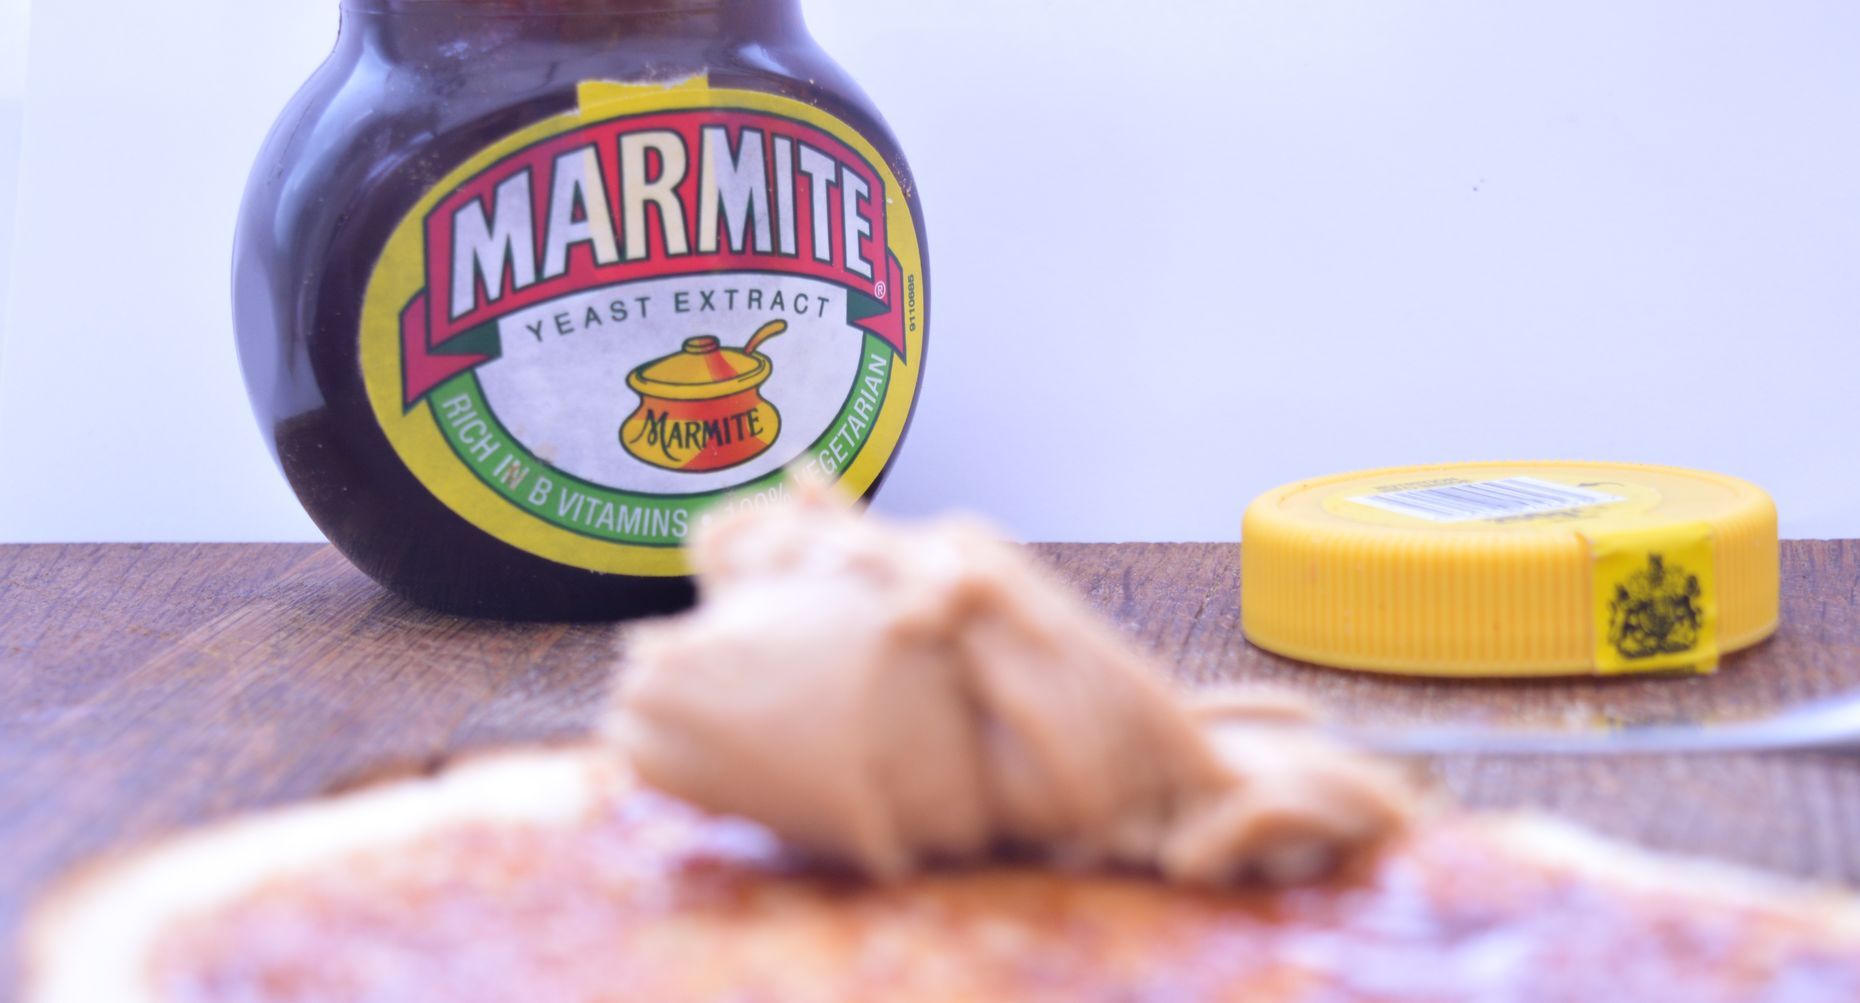 <p>It’s dark brown, yeasty, salty and very much a “love it or hate it” food. <a href="https://www.marmite.co.uk/faq.html" title="https://www.marmite.co.uk/faq.html">Marmite</a>, made from concentrated yeast extract, is a quintessential British food that definitely confuses the rest of the world. Whether they spread it on toast or eat it by the spoonful, Brits are known for their appetite for this divisive condiment, with a survey finding that <a href="https://www.thegrocer.co.uk/hate-marmite-it-turns-out-brits-actually-love-it/238357.article" title="https://www.thegrocer.co.uk/hate-marmite-it-turns-out-brits-actually-love-it/238357.article">47 per cent</a> love this gloopy spread.</p>